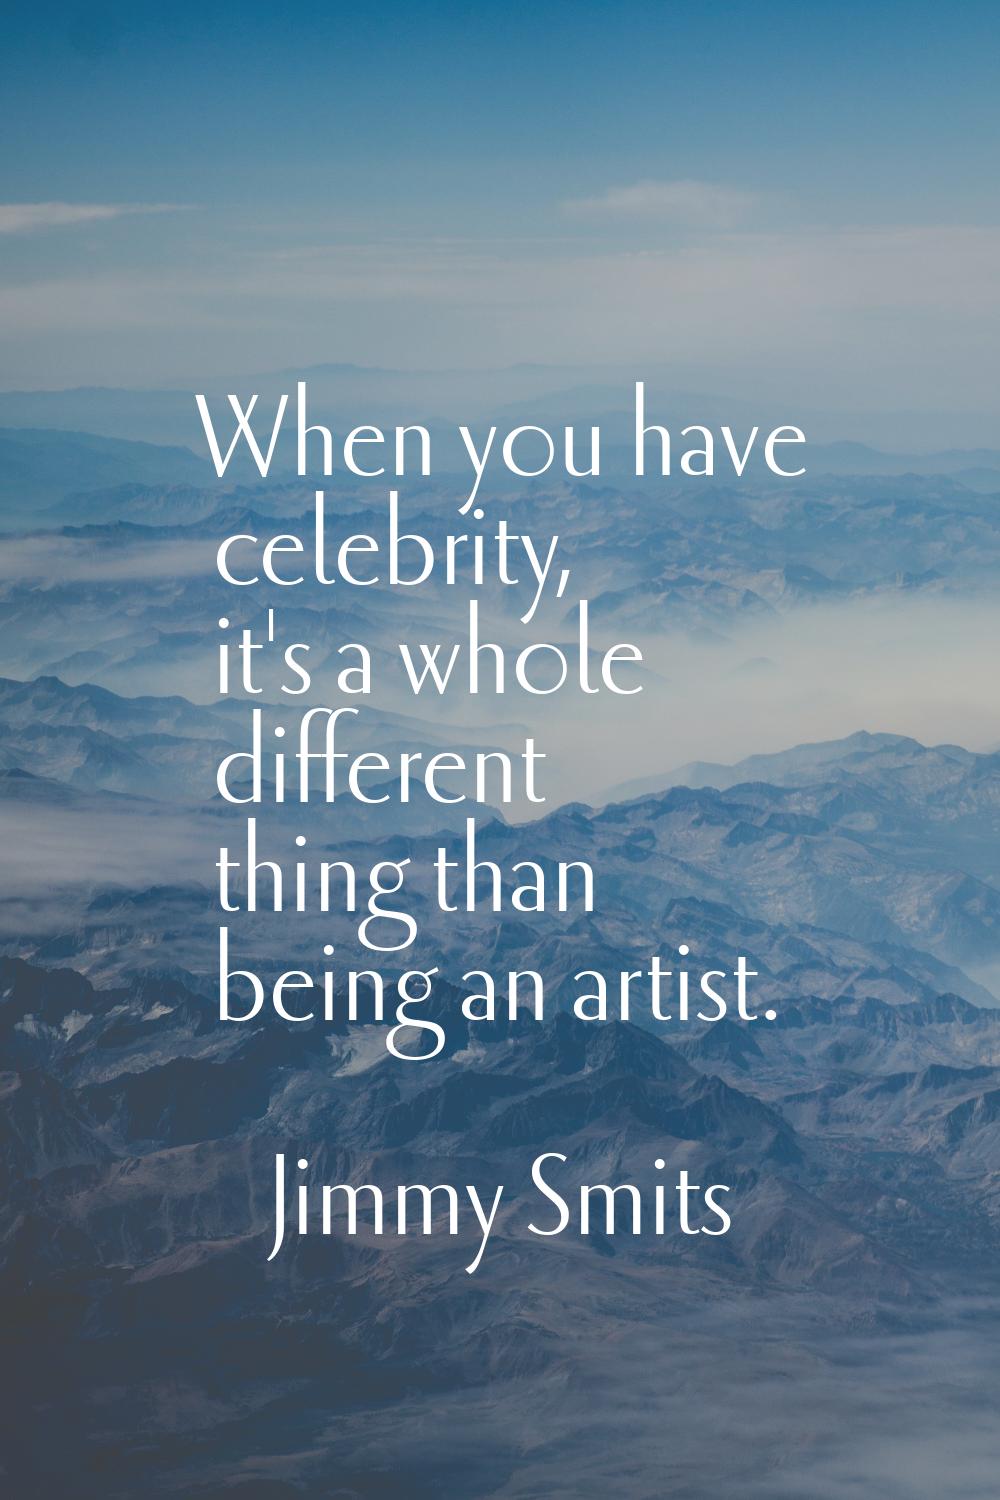 When you have celebrity, it's a whole different thing than being an artist.